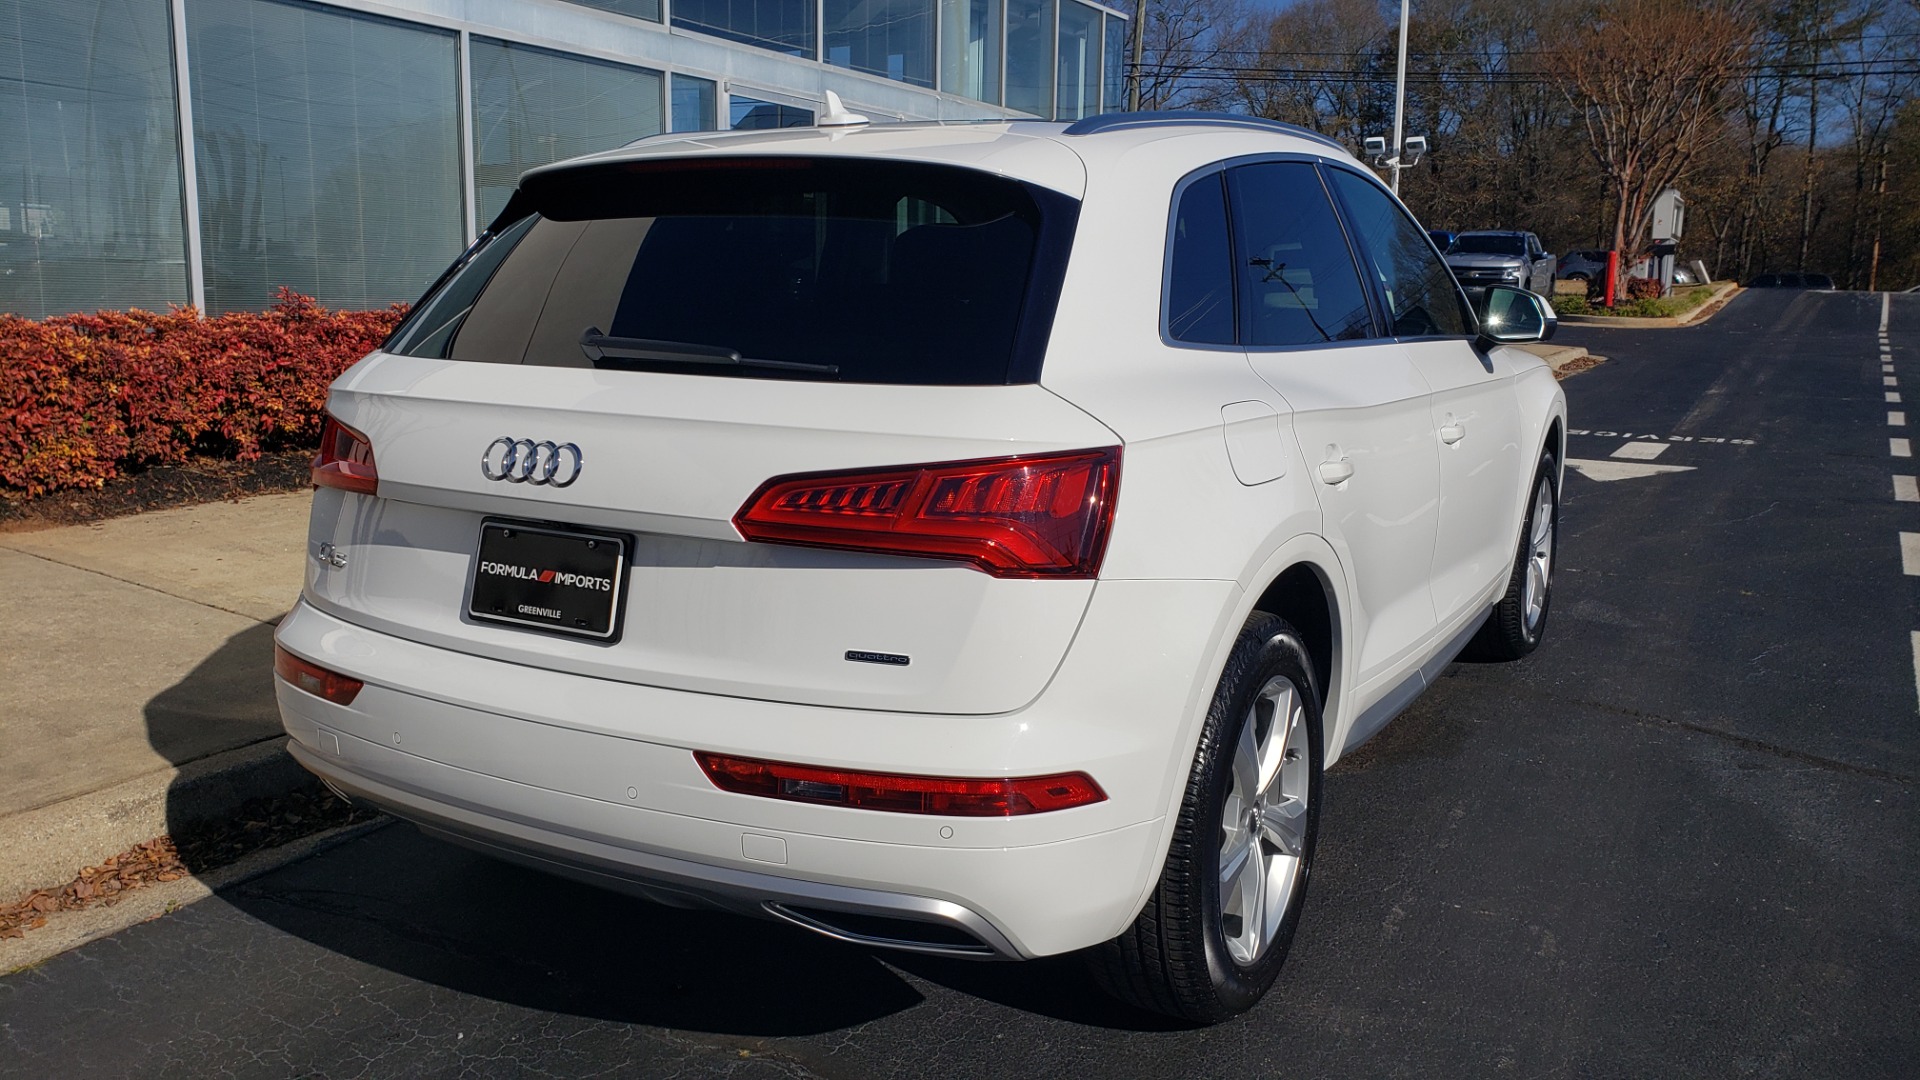 Used 2019 Audi Q5 PREMIUM PLUS 2.0L / AWD / NAV / PANO-ROOF / DRVR ASST / REARVIEW for sale $42,395 at Formula Imports in Charlotte NC 28227 8